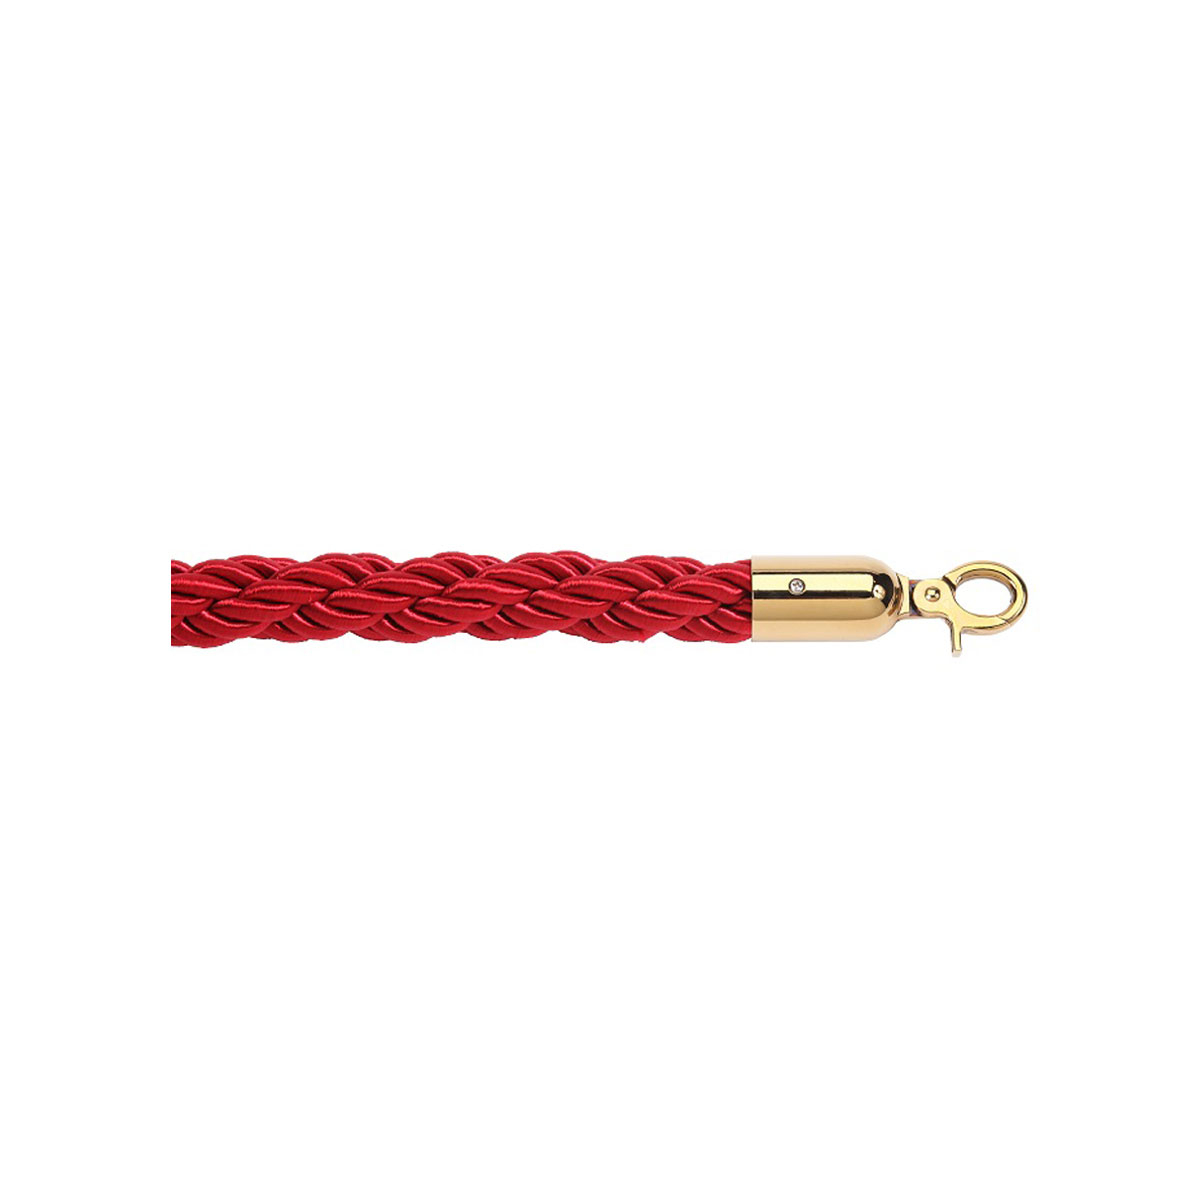 RopeMaster Post Barrier Ropes Red Braided Rope With Polished Brass Snap End